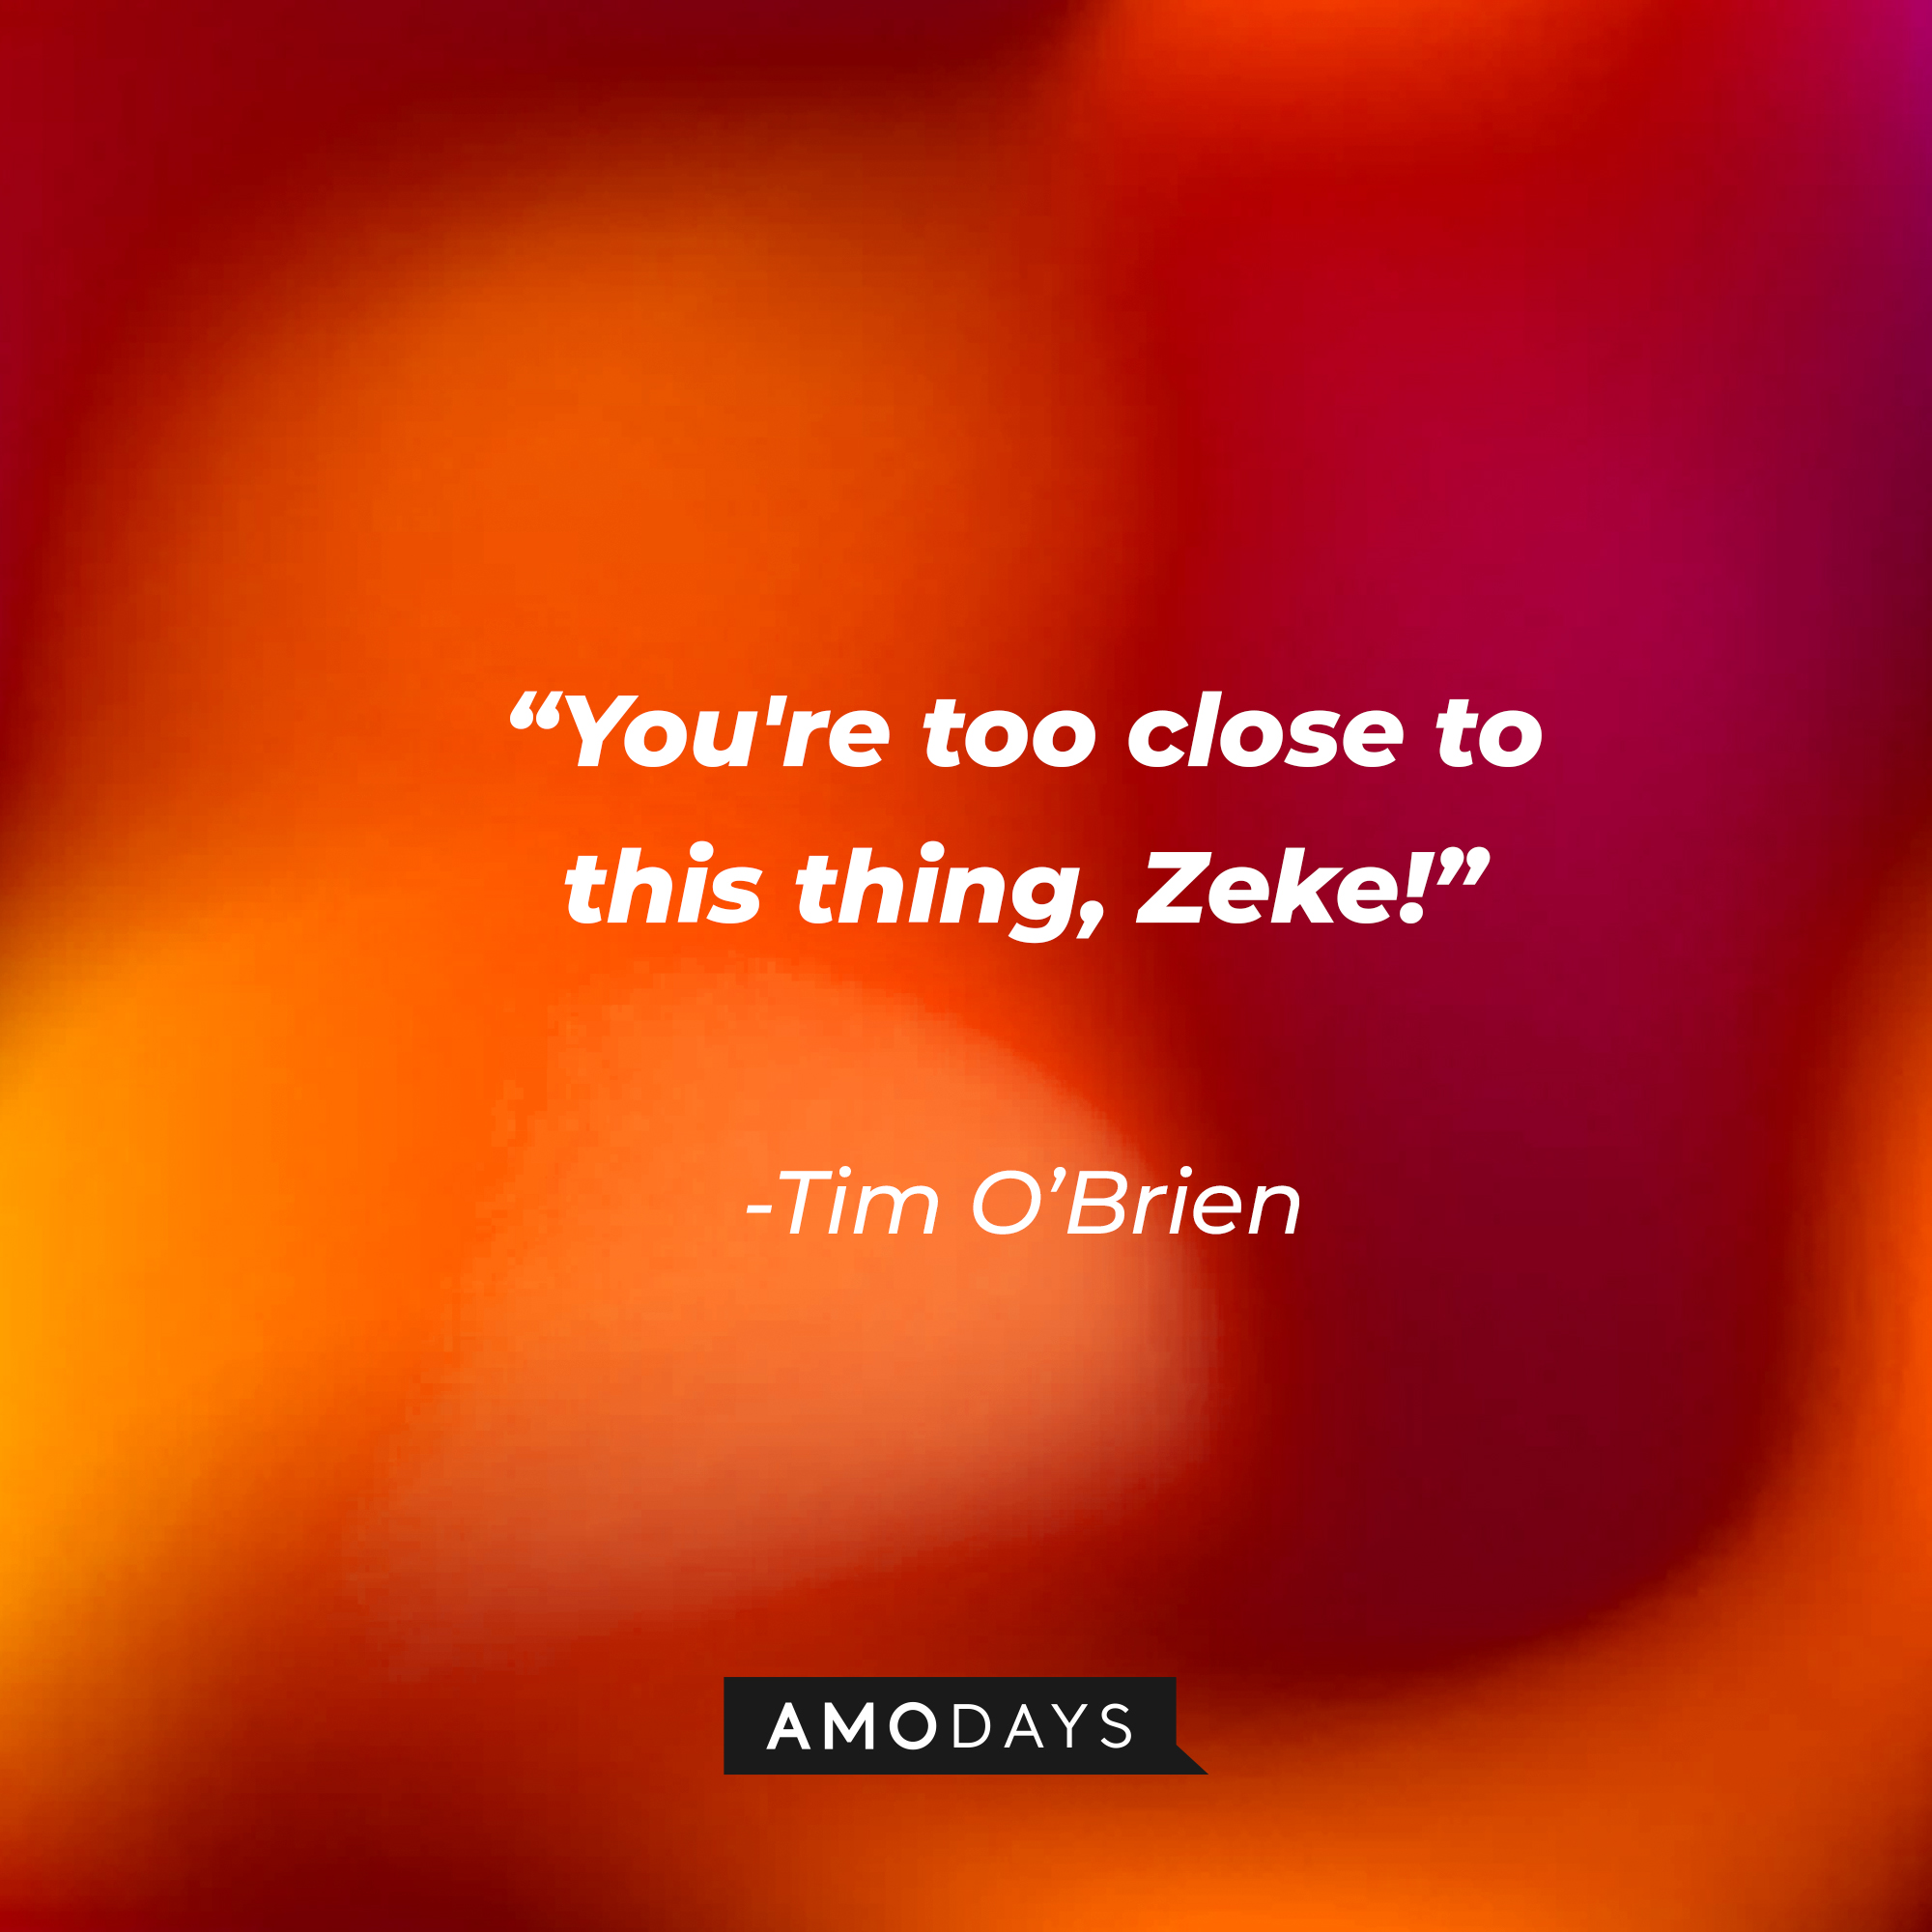 Tim O’Brien's quote: “You're too close to this thing, Zeke!" | Source: Amodays